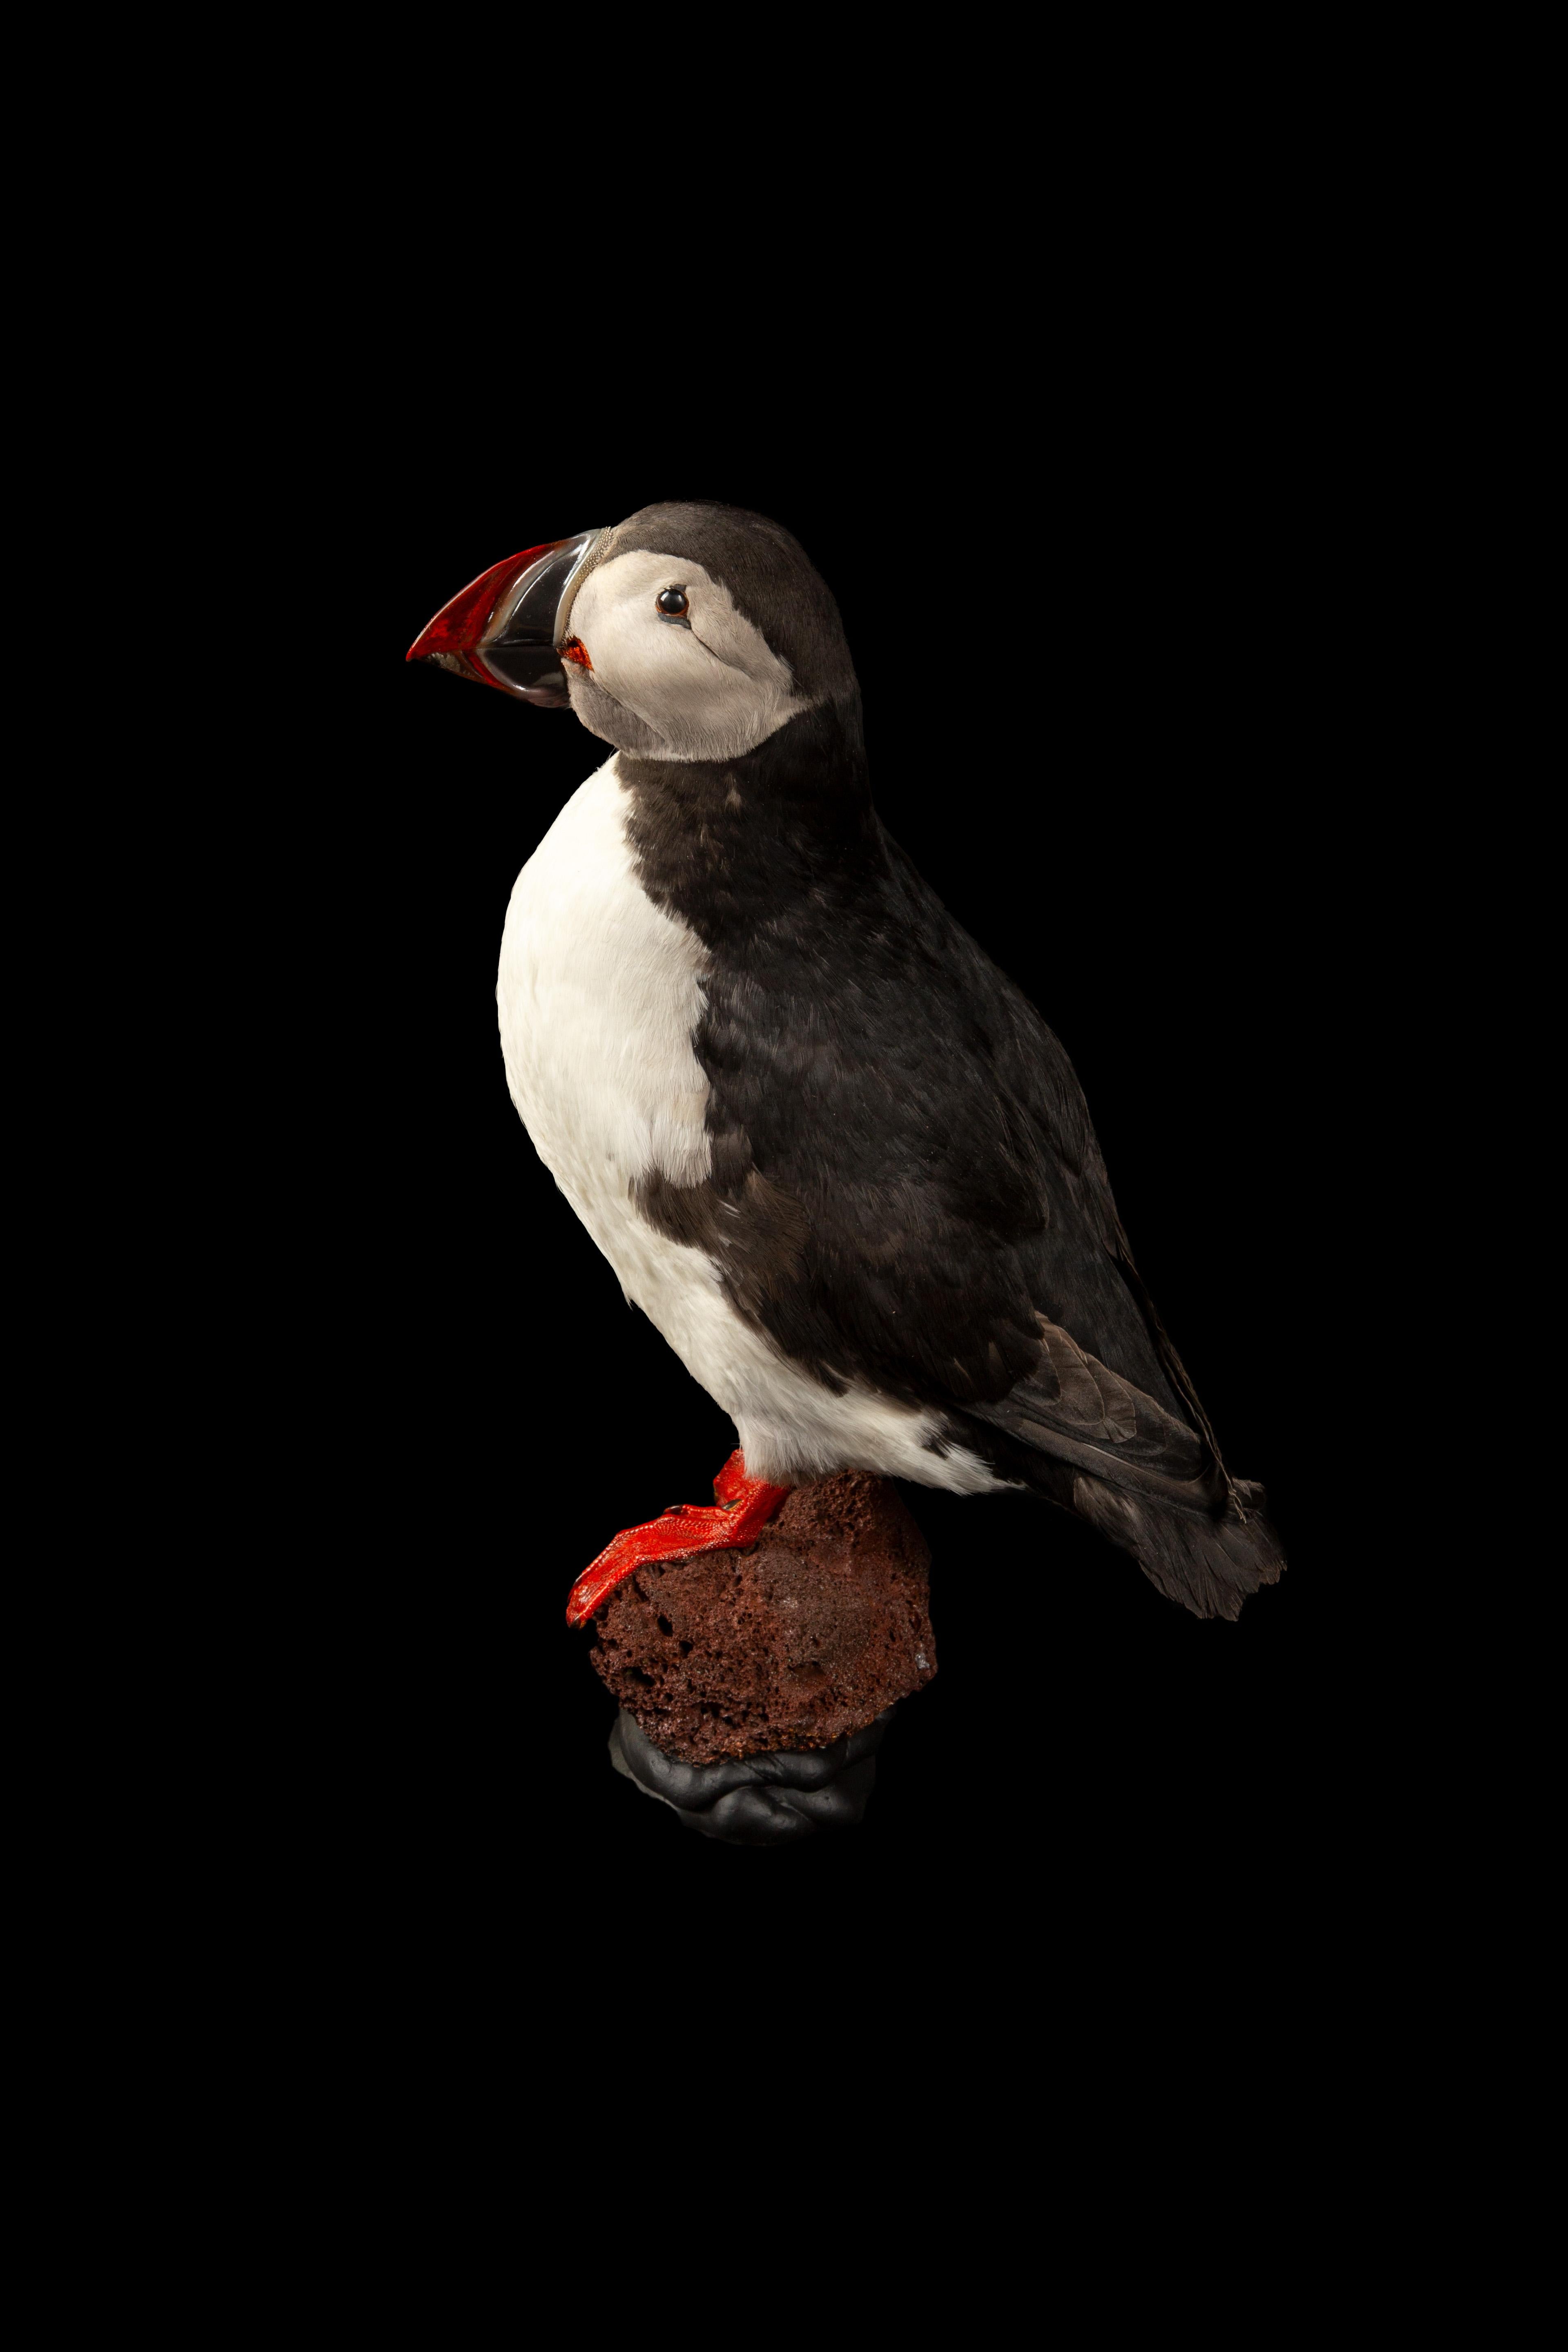 Meticulously crafted Taxidermy Atlantic Puffin Bird (Fratercula arctica), also known as the common puffin, a remarkable specimen from the auk family. This exquisite avian creation showcases the distinctive features of the Atlantic puffin, the sole